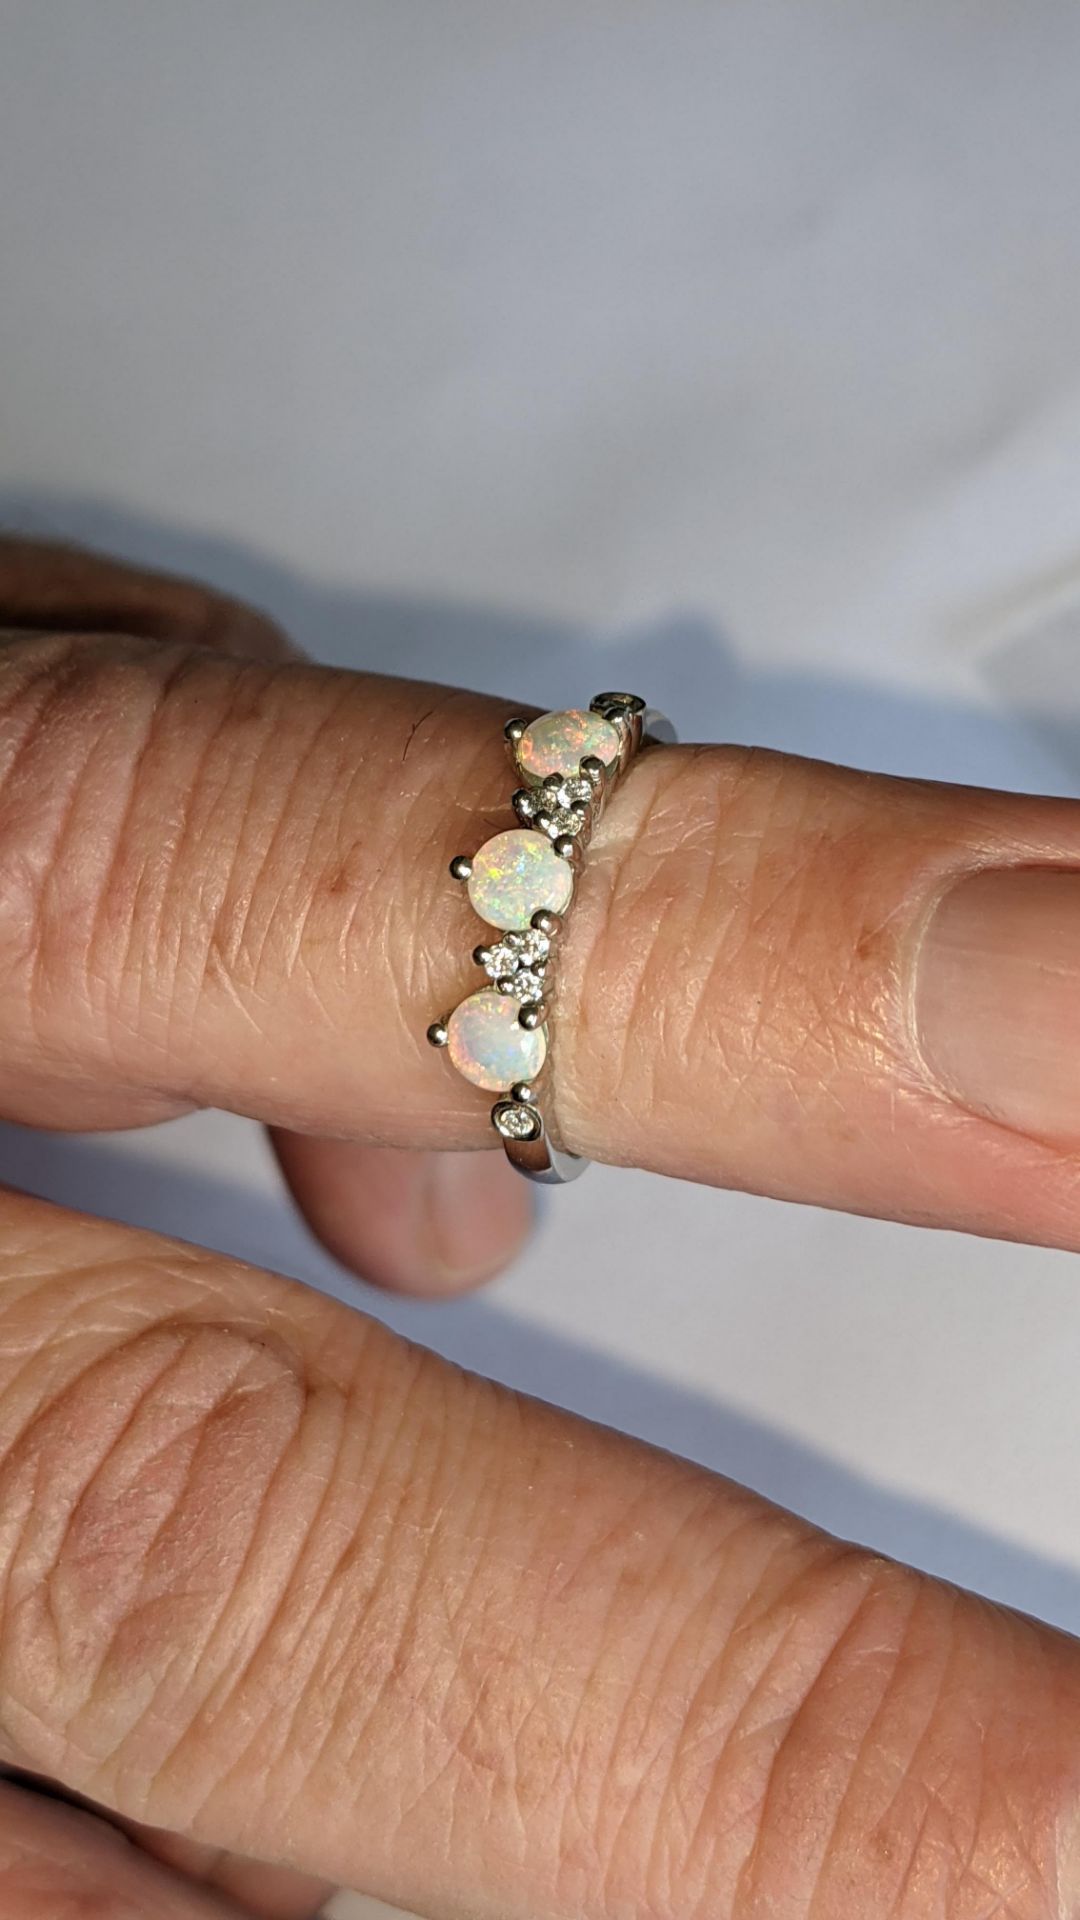 Platinum 950 ring with opals & diamonds, RRP £1,695 - Image 18 of 18